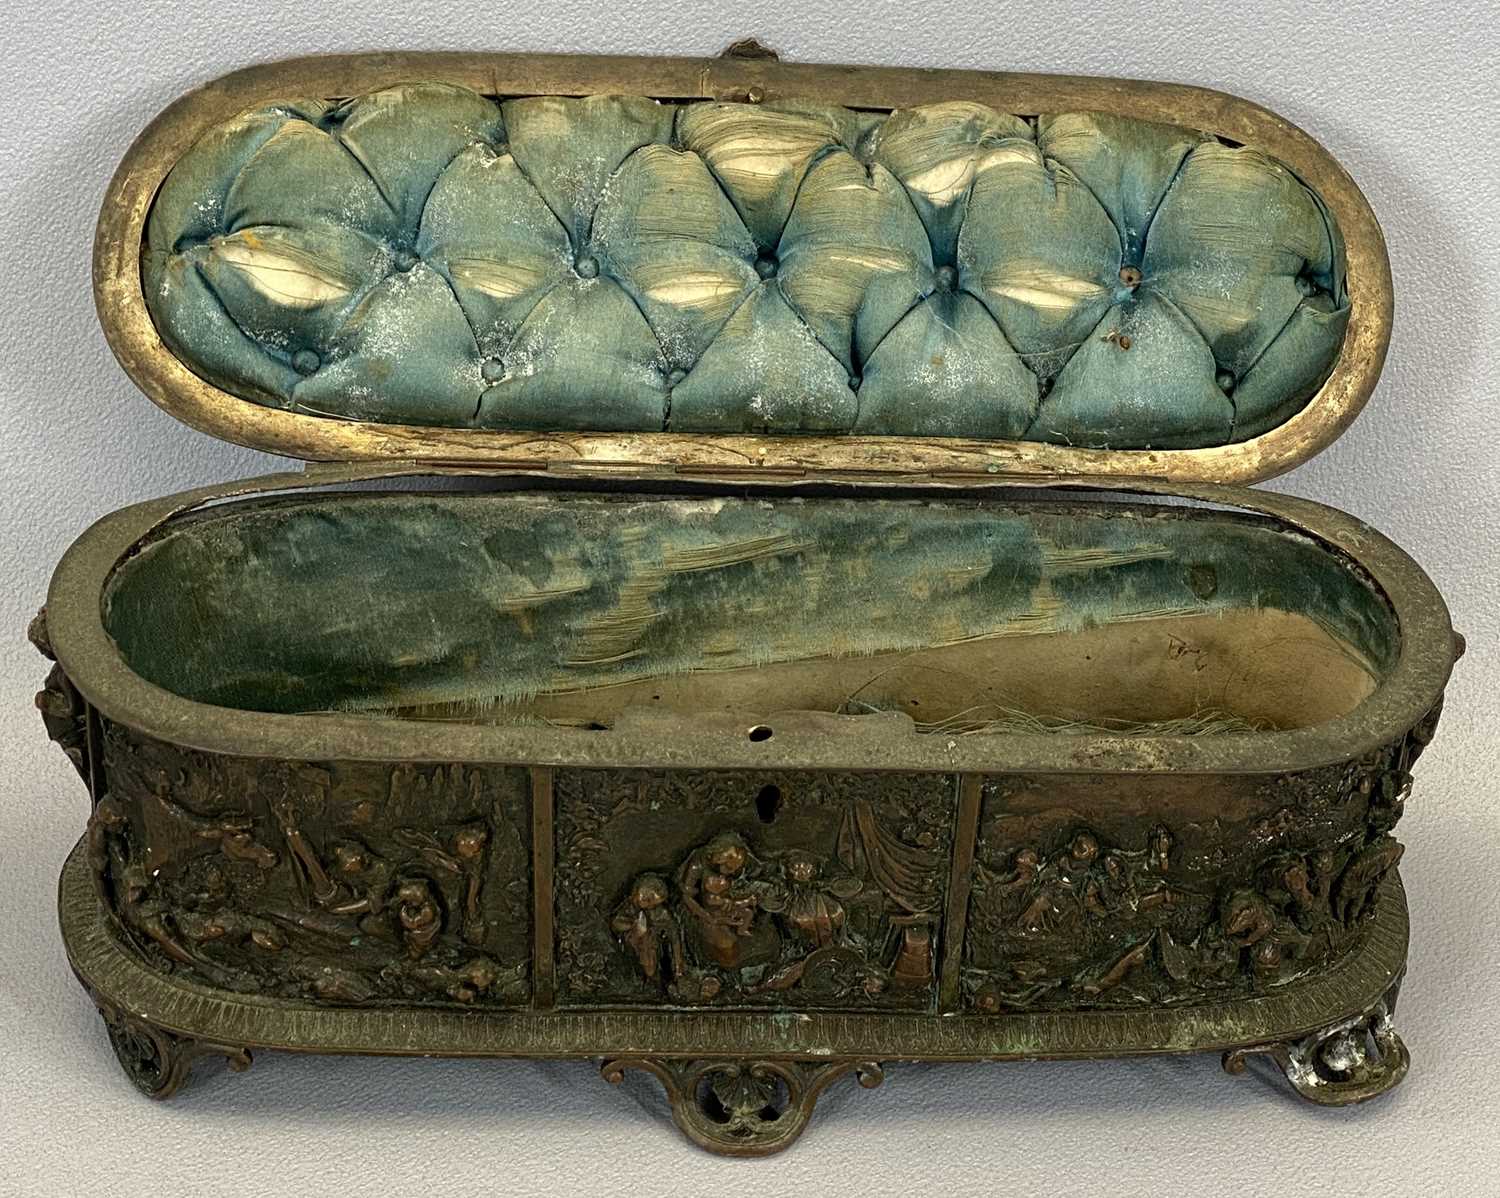 FRENCH OVAL COPPER TRINKET BOX - 19th century decorated in high relief with figures, hinged cover - Image 2 of 3